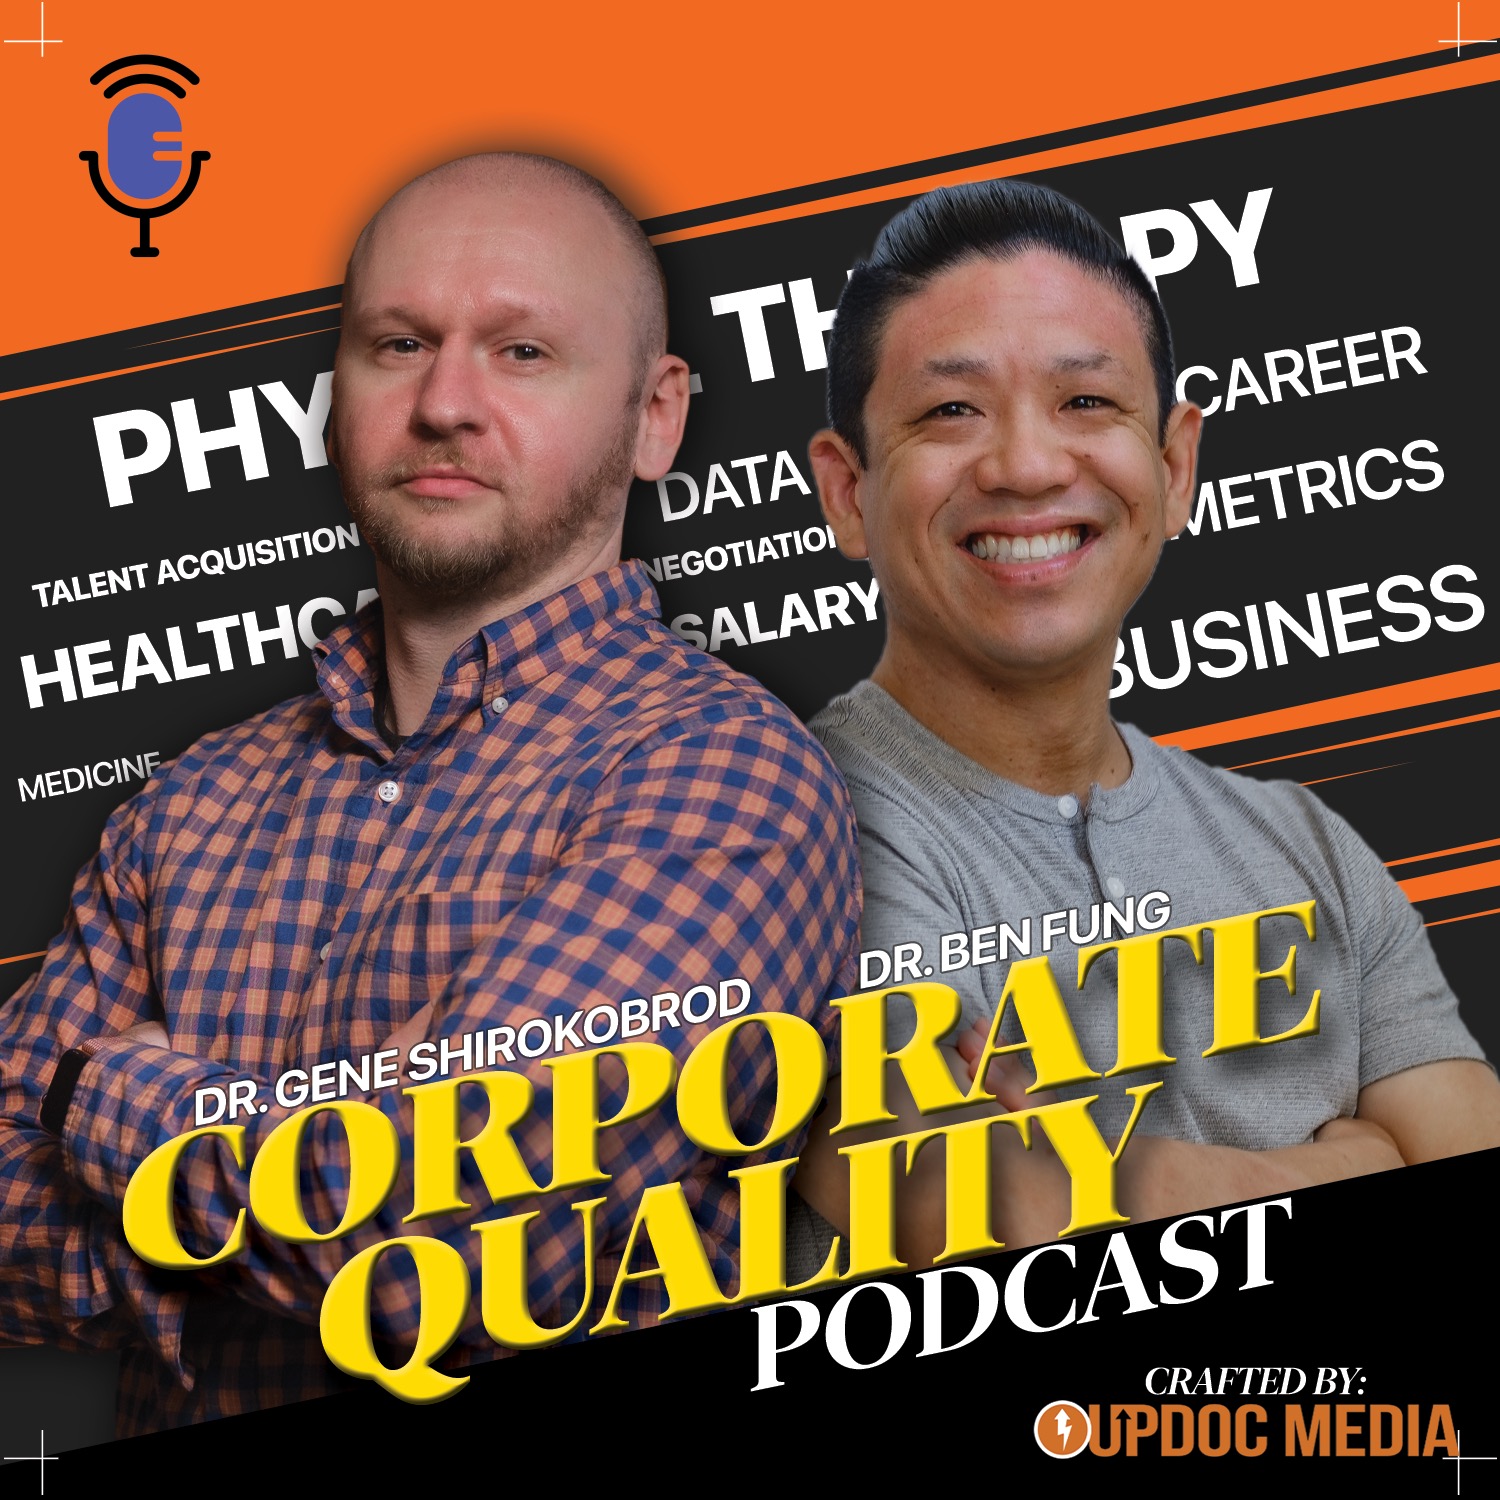 Corporate Quality Podcast by UpDoc Media - Final Cover